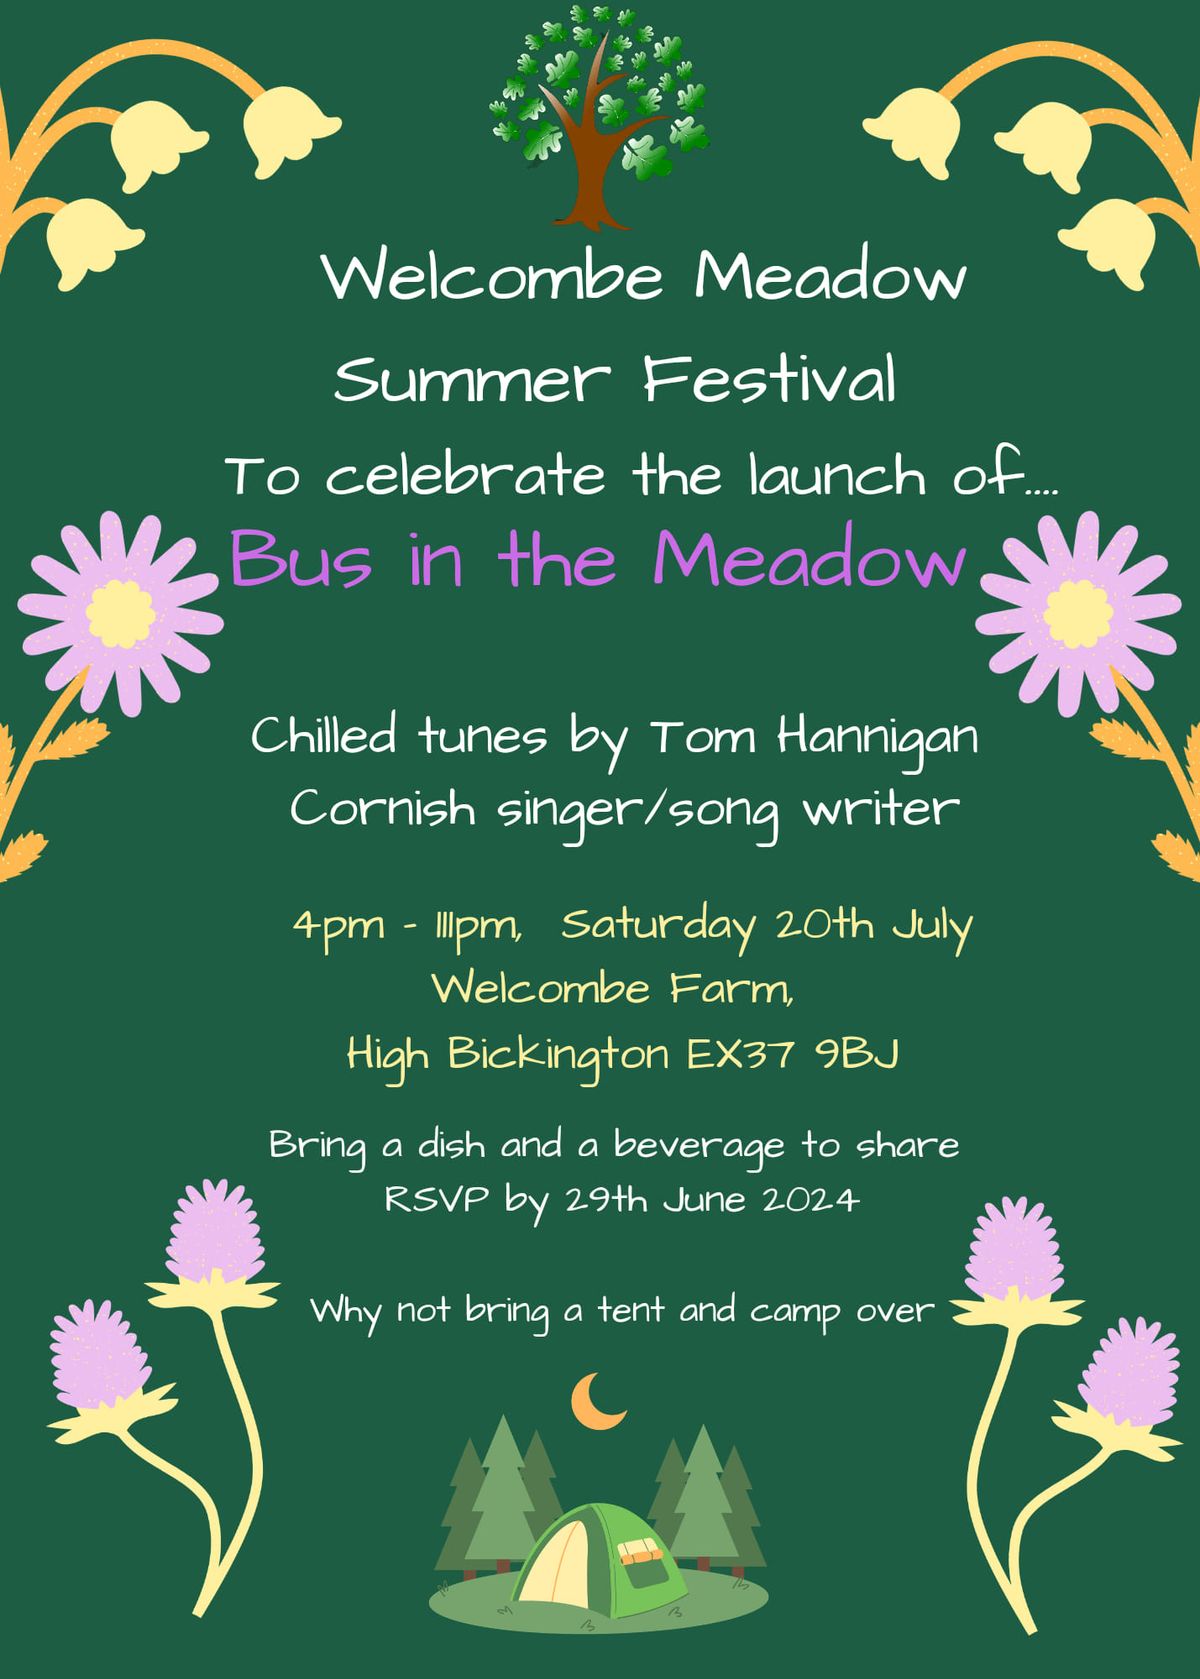 Bus in the Meadow Launch